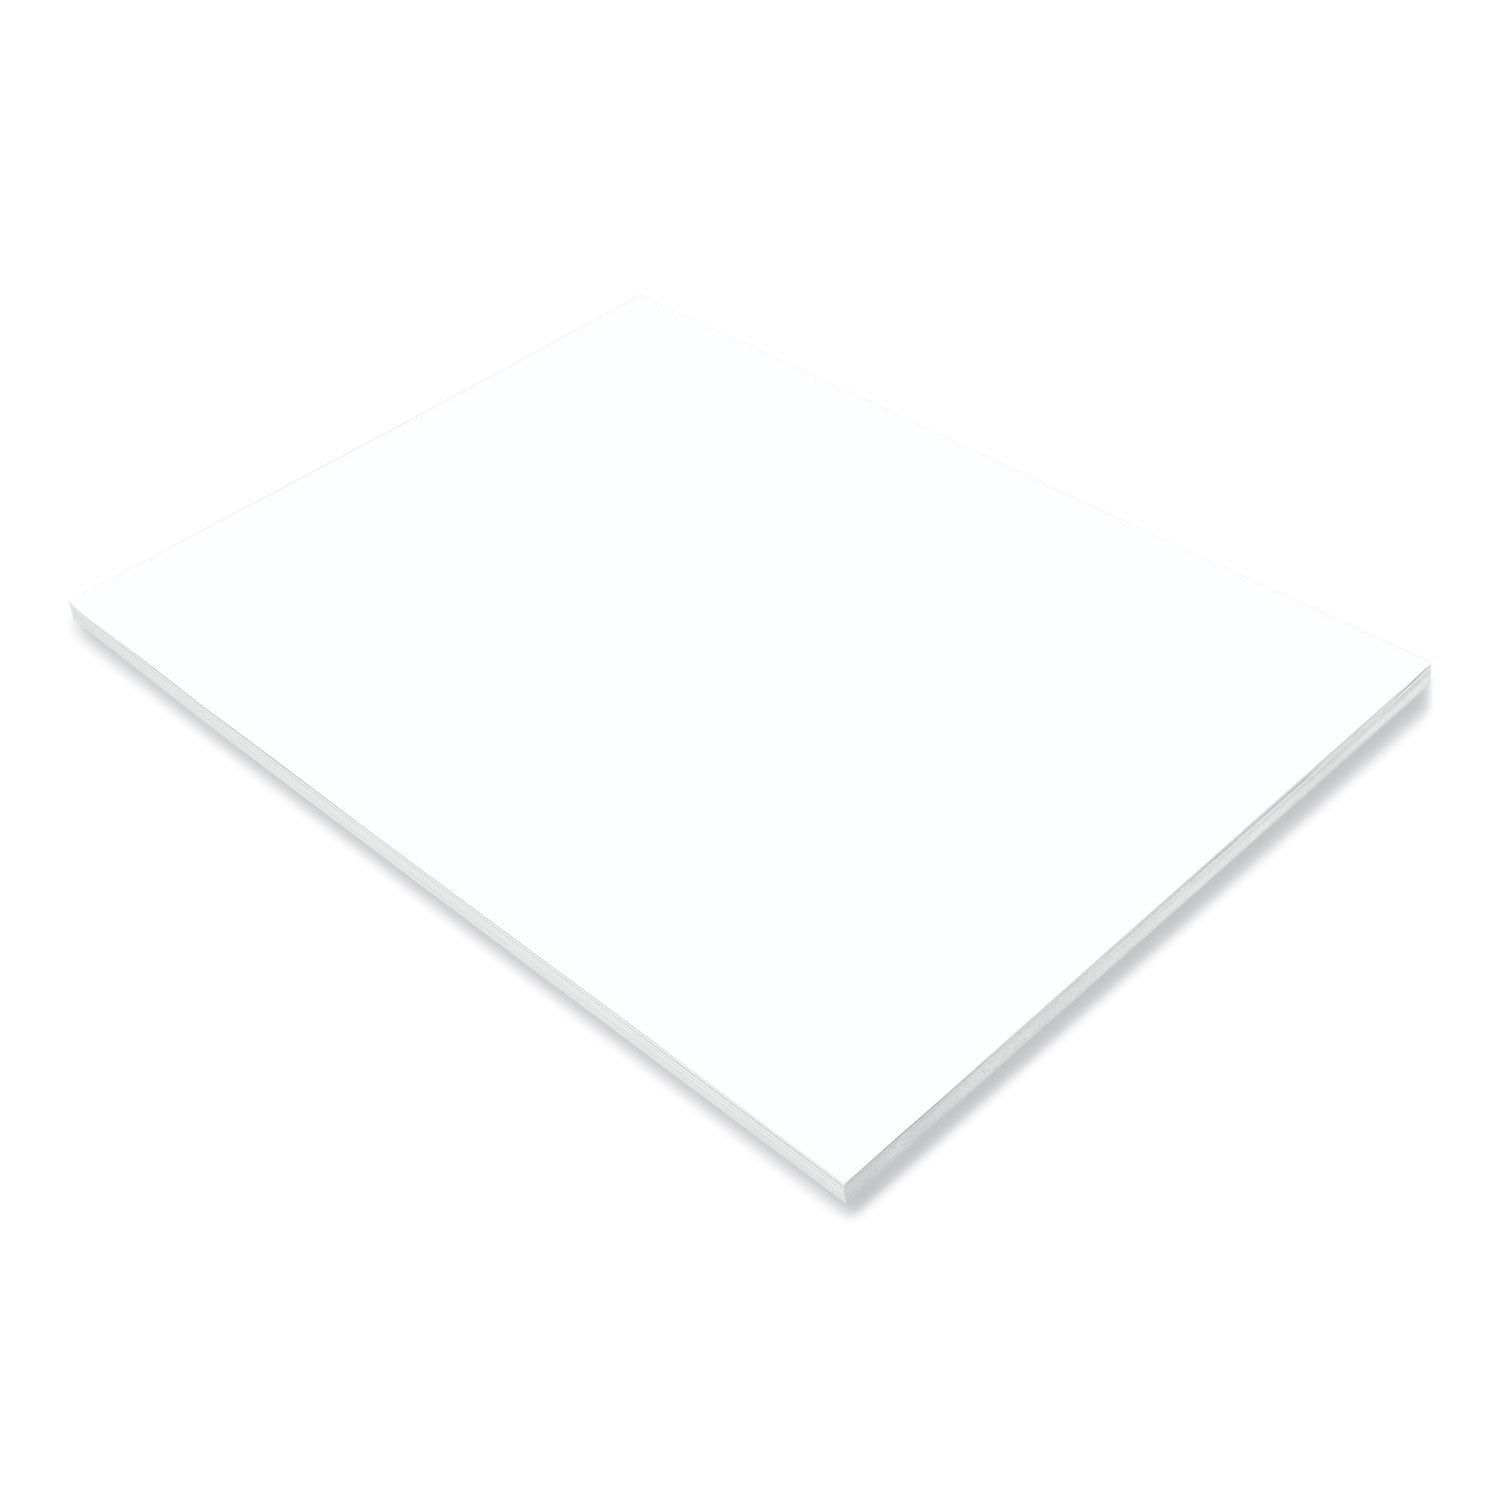 SunWorks Construction Paper, 50 lb Text Weight, 18 x 24, Bright White, 50/Pack - 